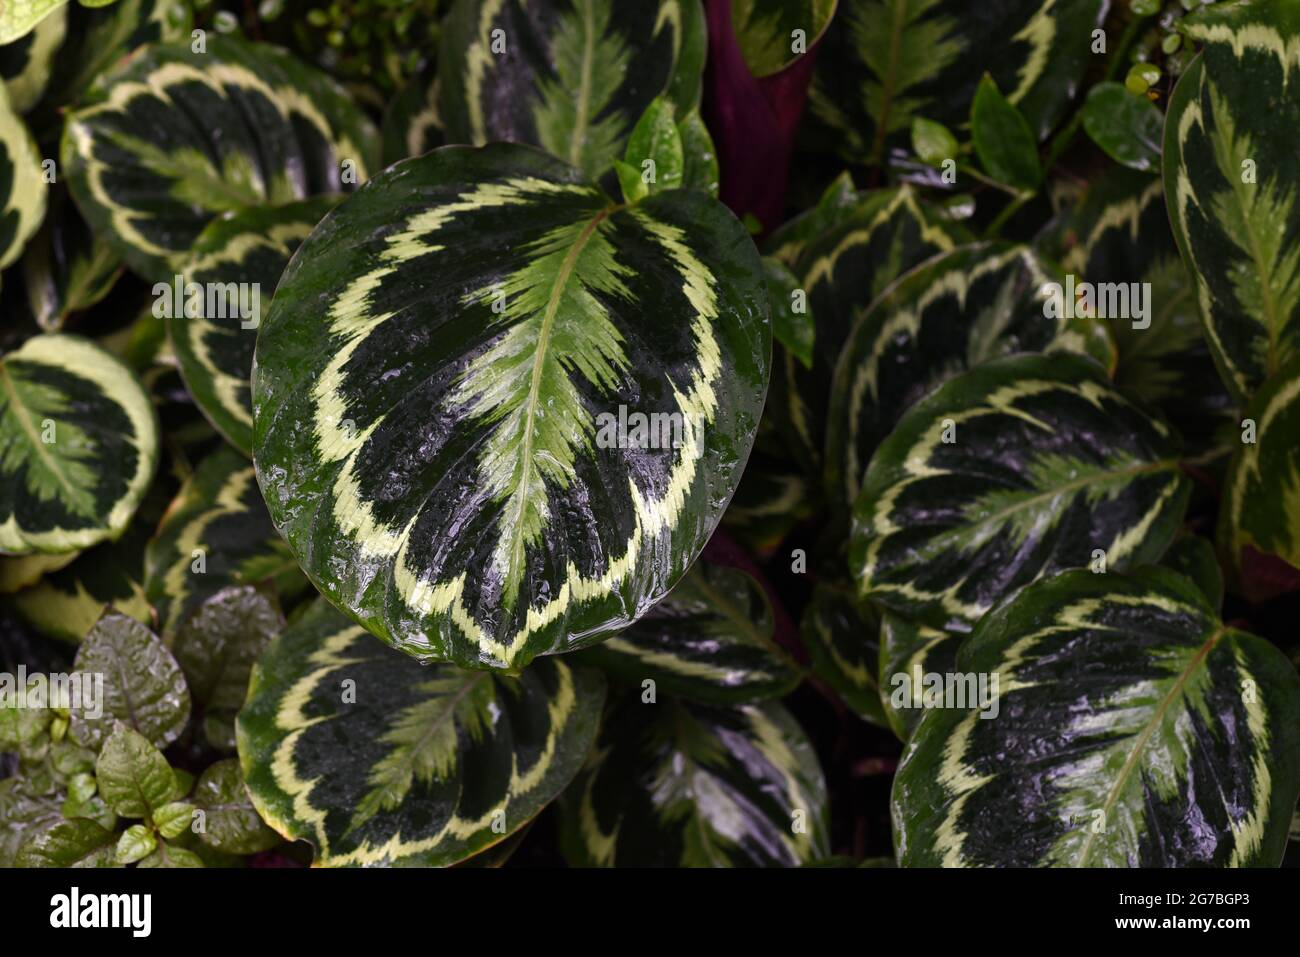 The leaves of a Rose Painted Calathea (Goeppertia roseoptica)  plant on display at the Muttart Conservatory in Edmonton, Alberta, Canada. The plant is Stock Photo